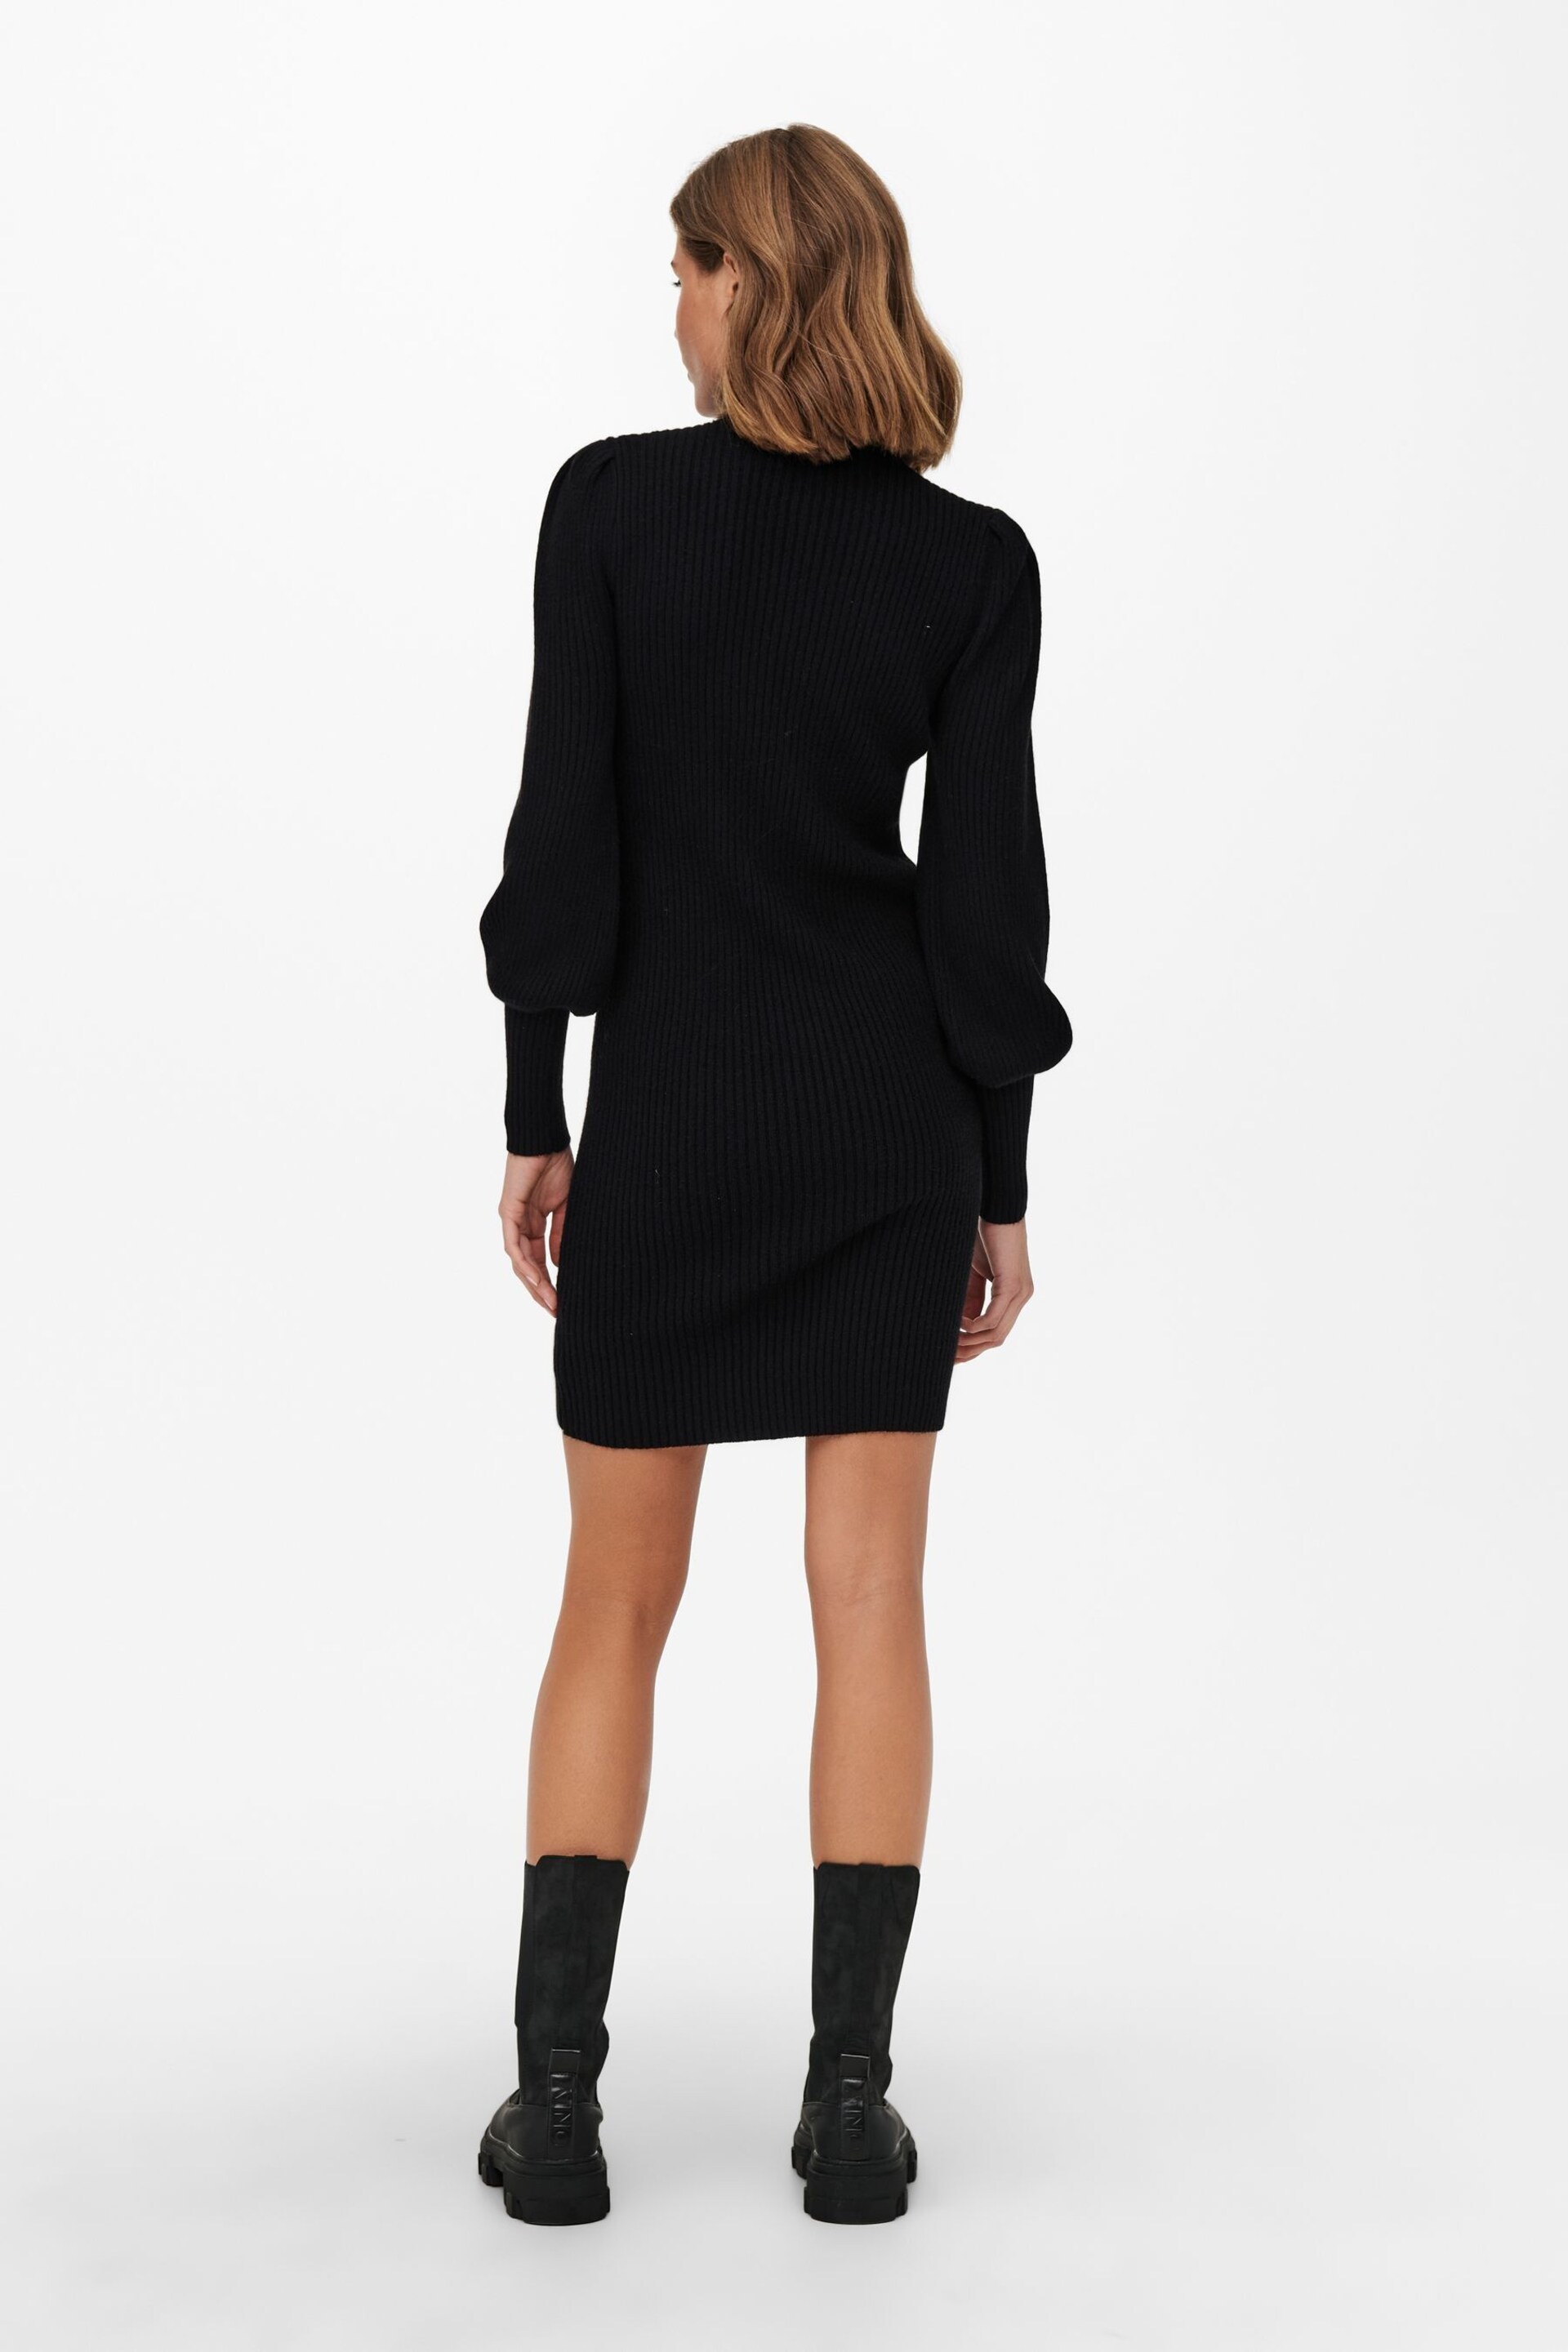 ONLY Black Puff Sleeve Knitted Jumper Dress - Image 2 of 5